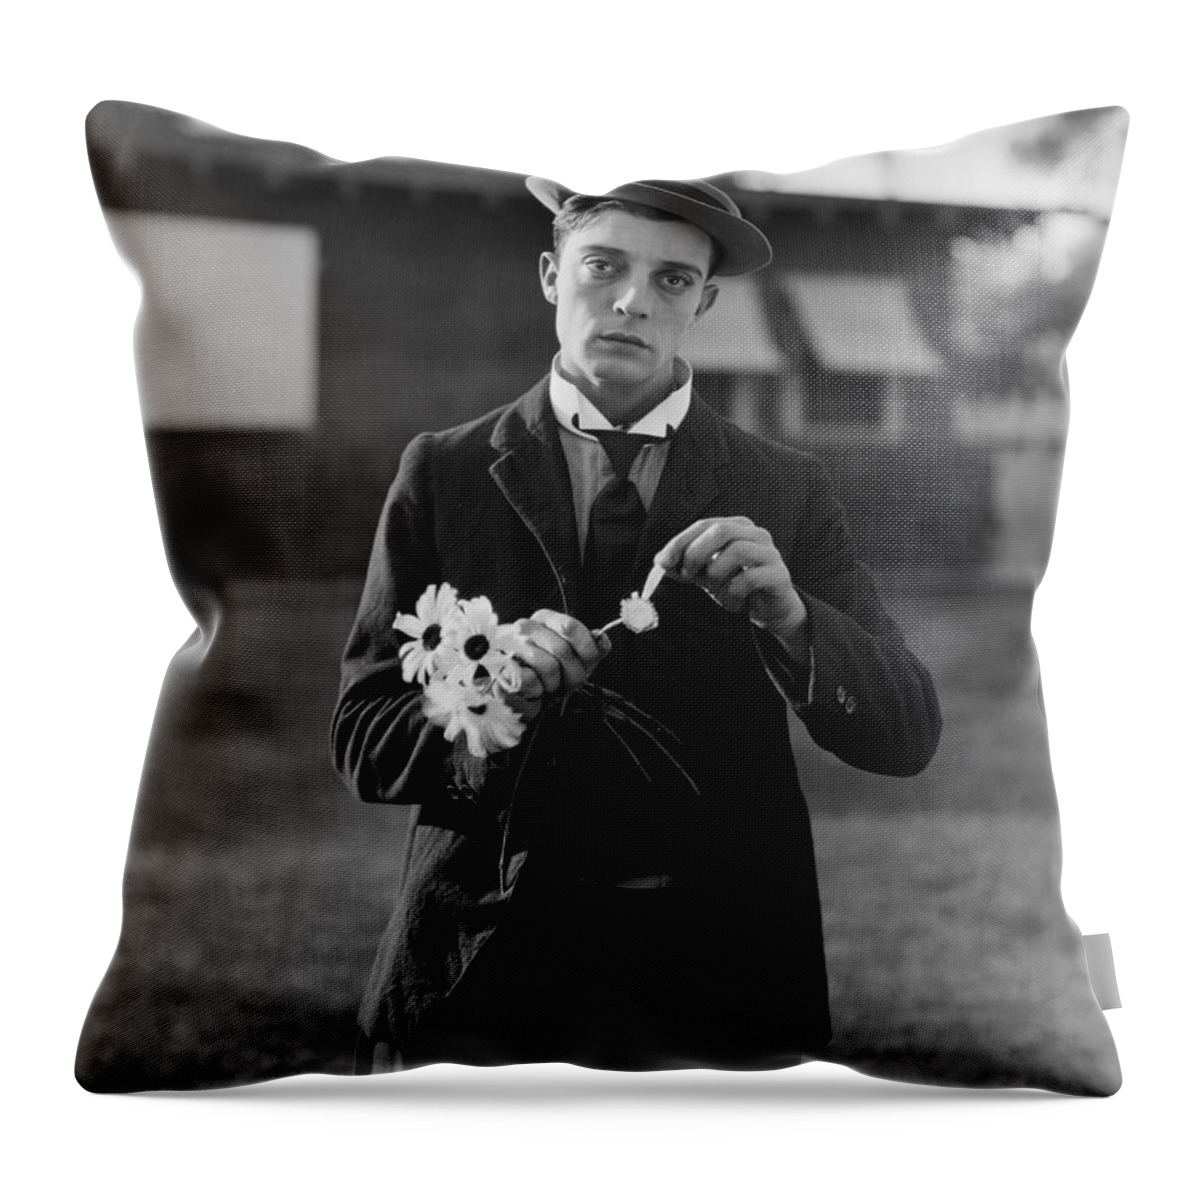 Movie Poster Throw Pillow featuring the photograph Buster Keaton Portrait by Georgia Clare